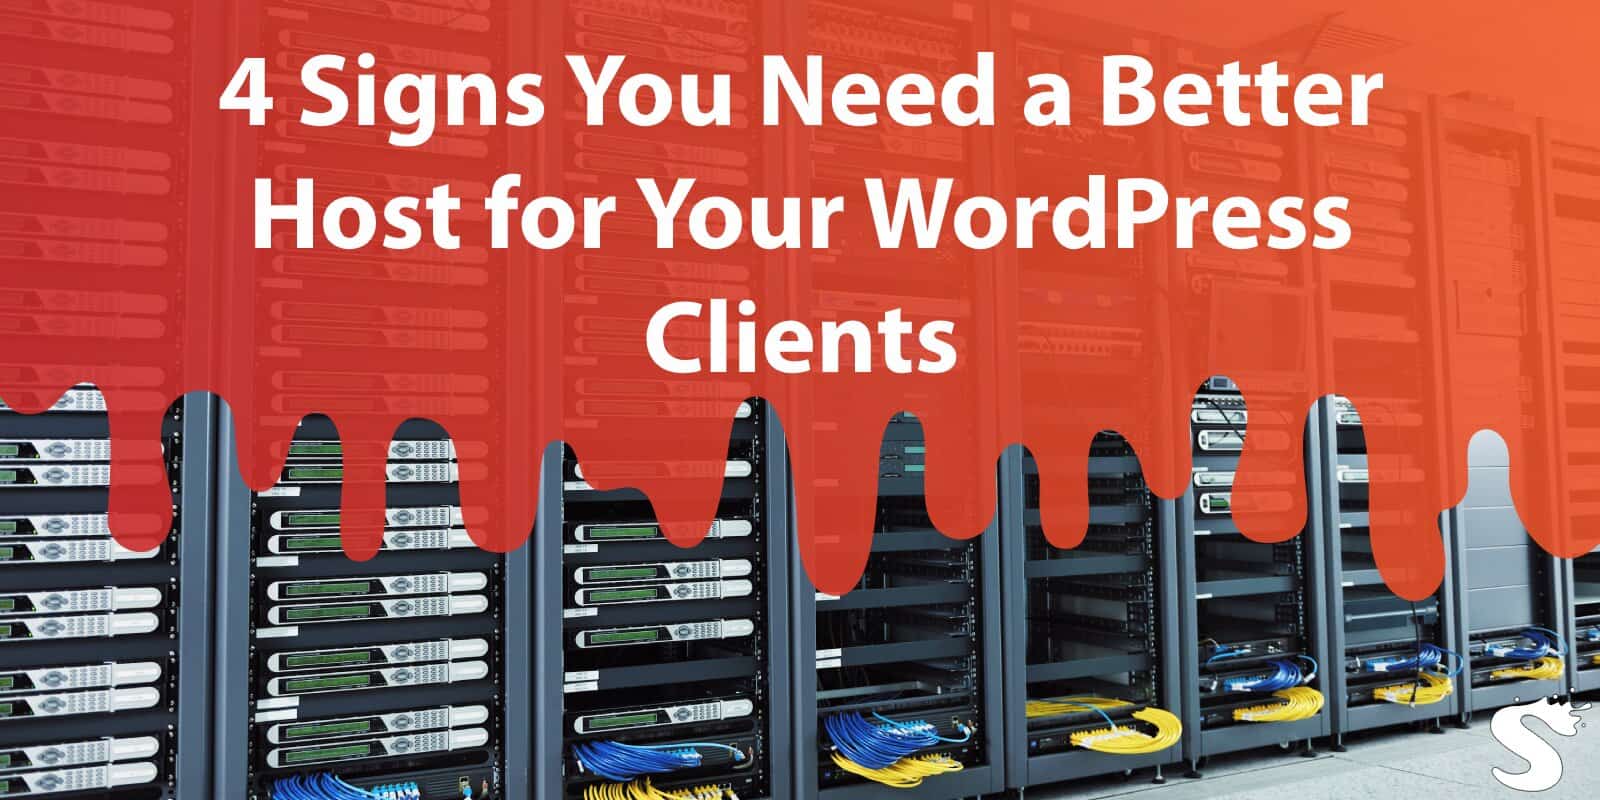 4 Signs You Need a Better Host for Your Wordpress Clients